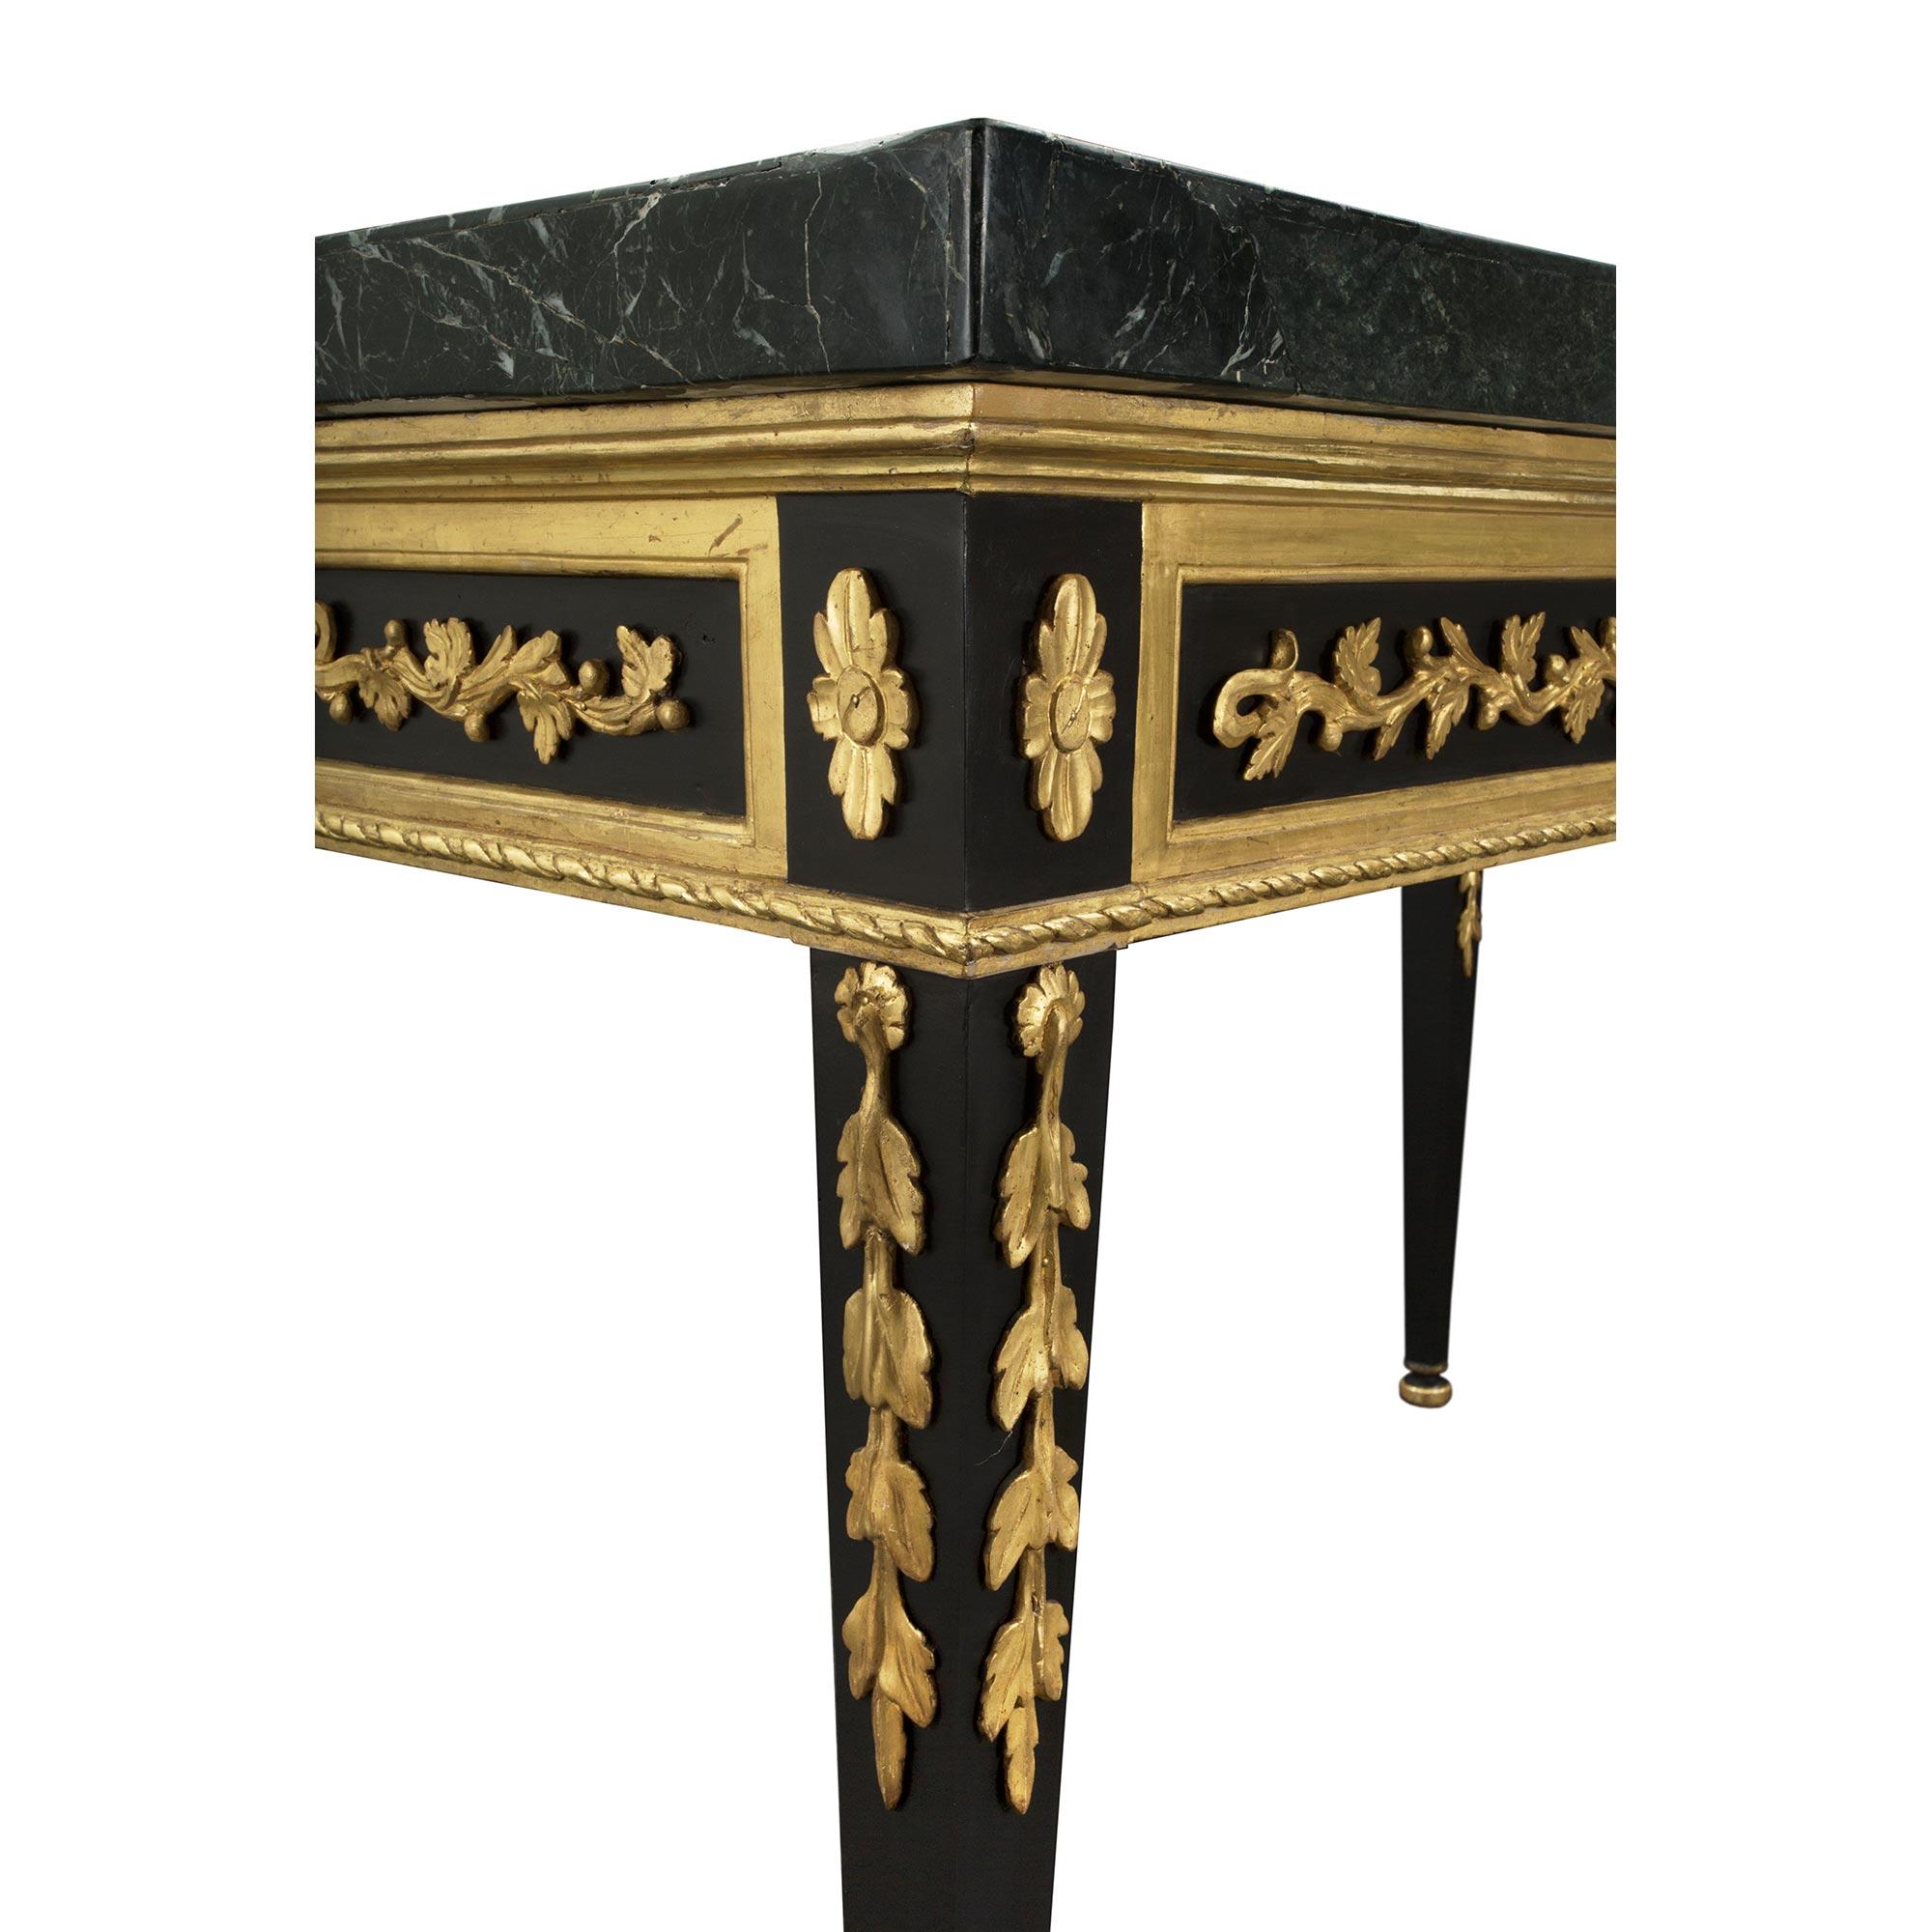 Italian 19th Century Louis XVI Giltwood and Marble Freestanding Console For Sale 2